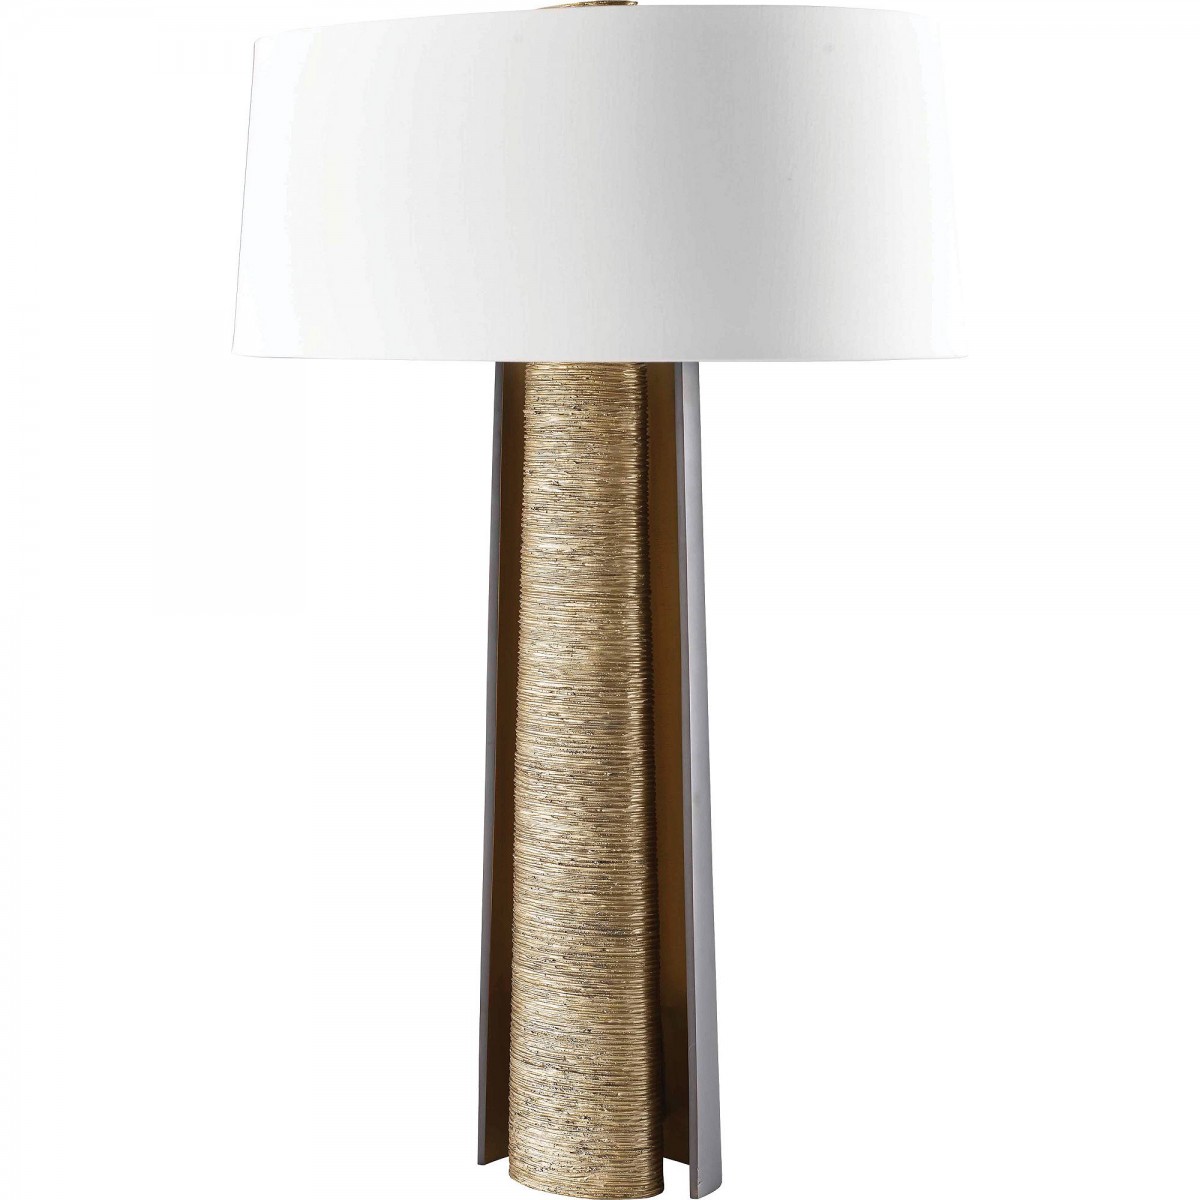 How To Maintain Floor Lamp?